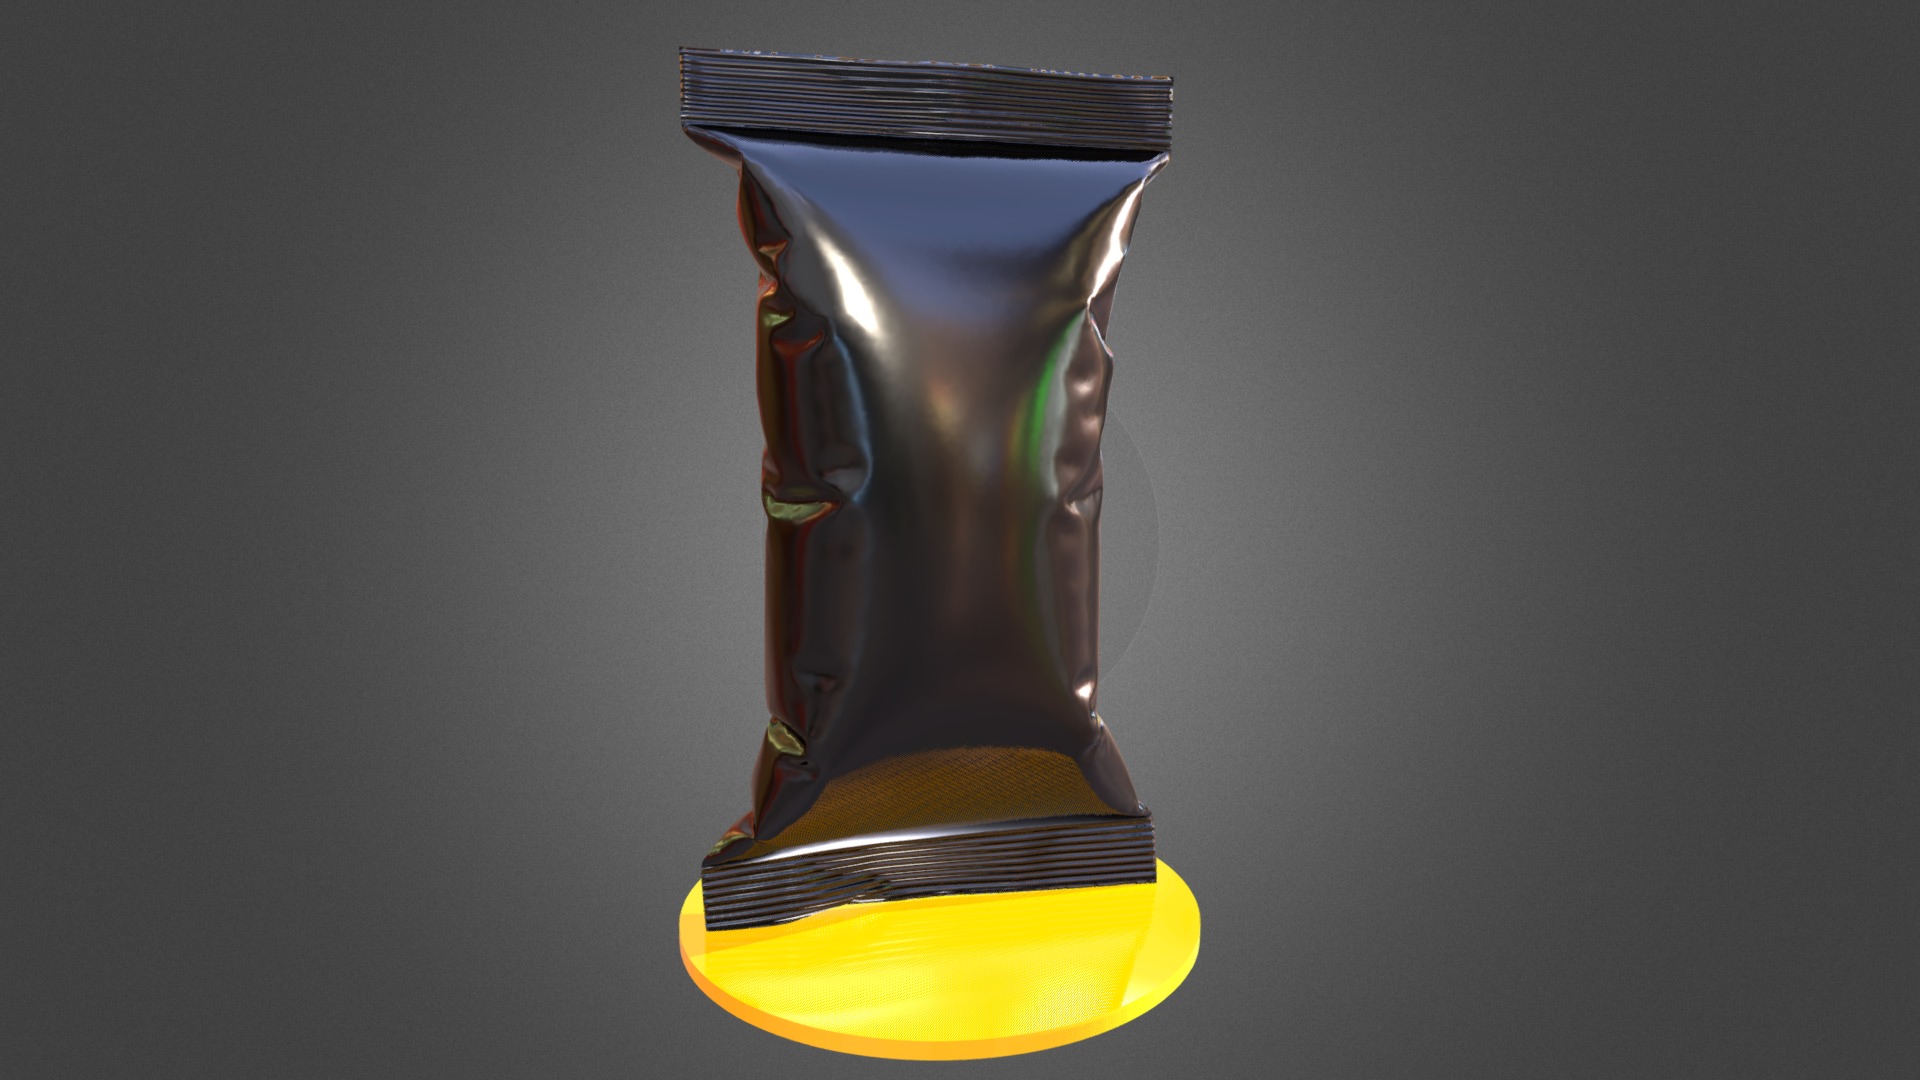 3D model Food packaging v10 - This is a 3D model of the Food packaging v10. The 3D model is about a glass with a liquid in it.